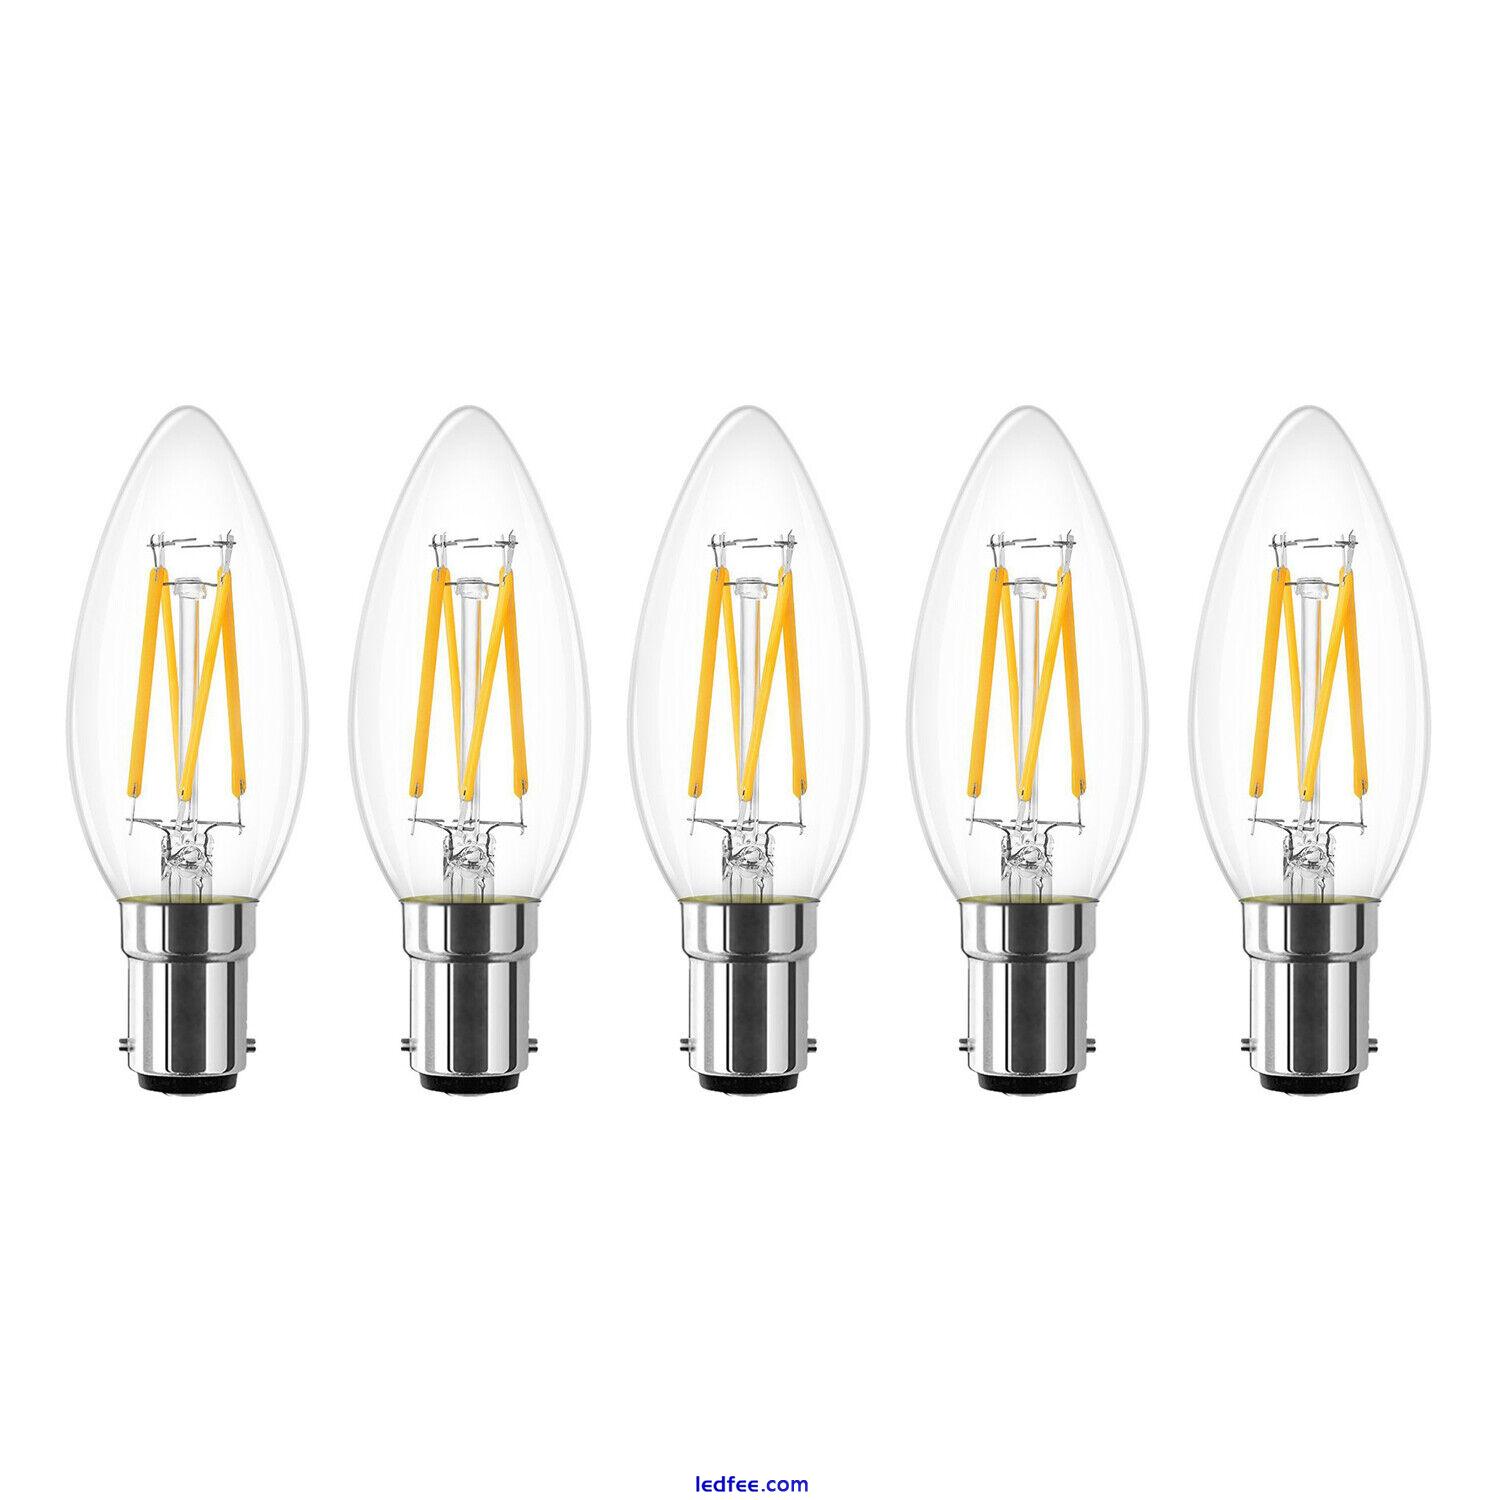 Dimmable 4W B15 Small Bayonet LED Candle Filament Light Bulb Industrial Vintage 3 